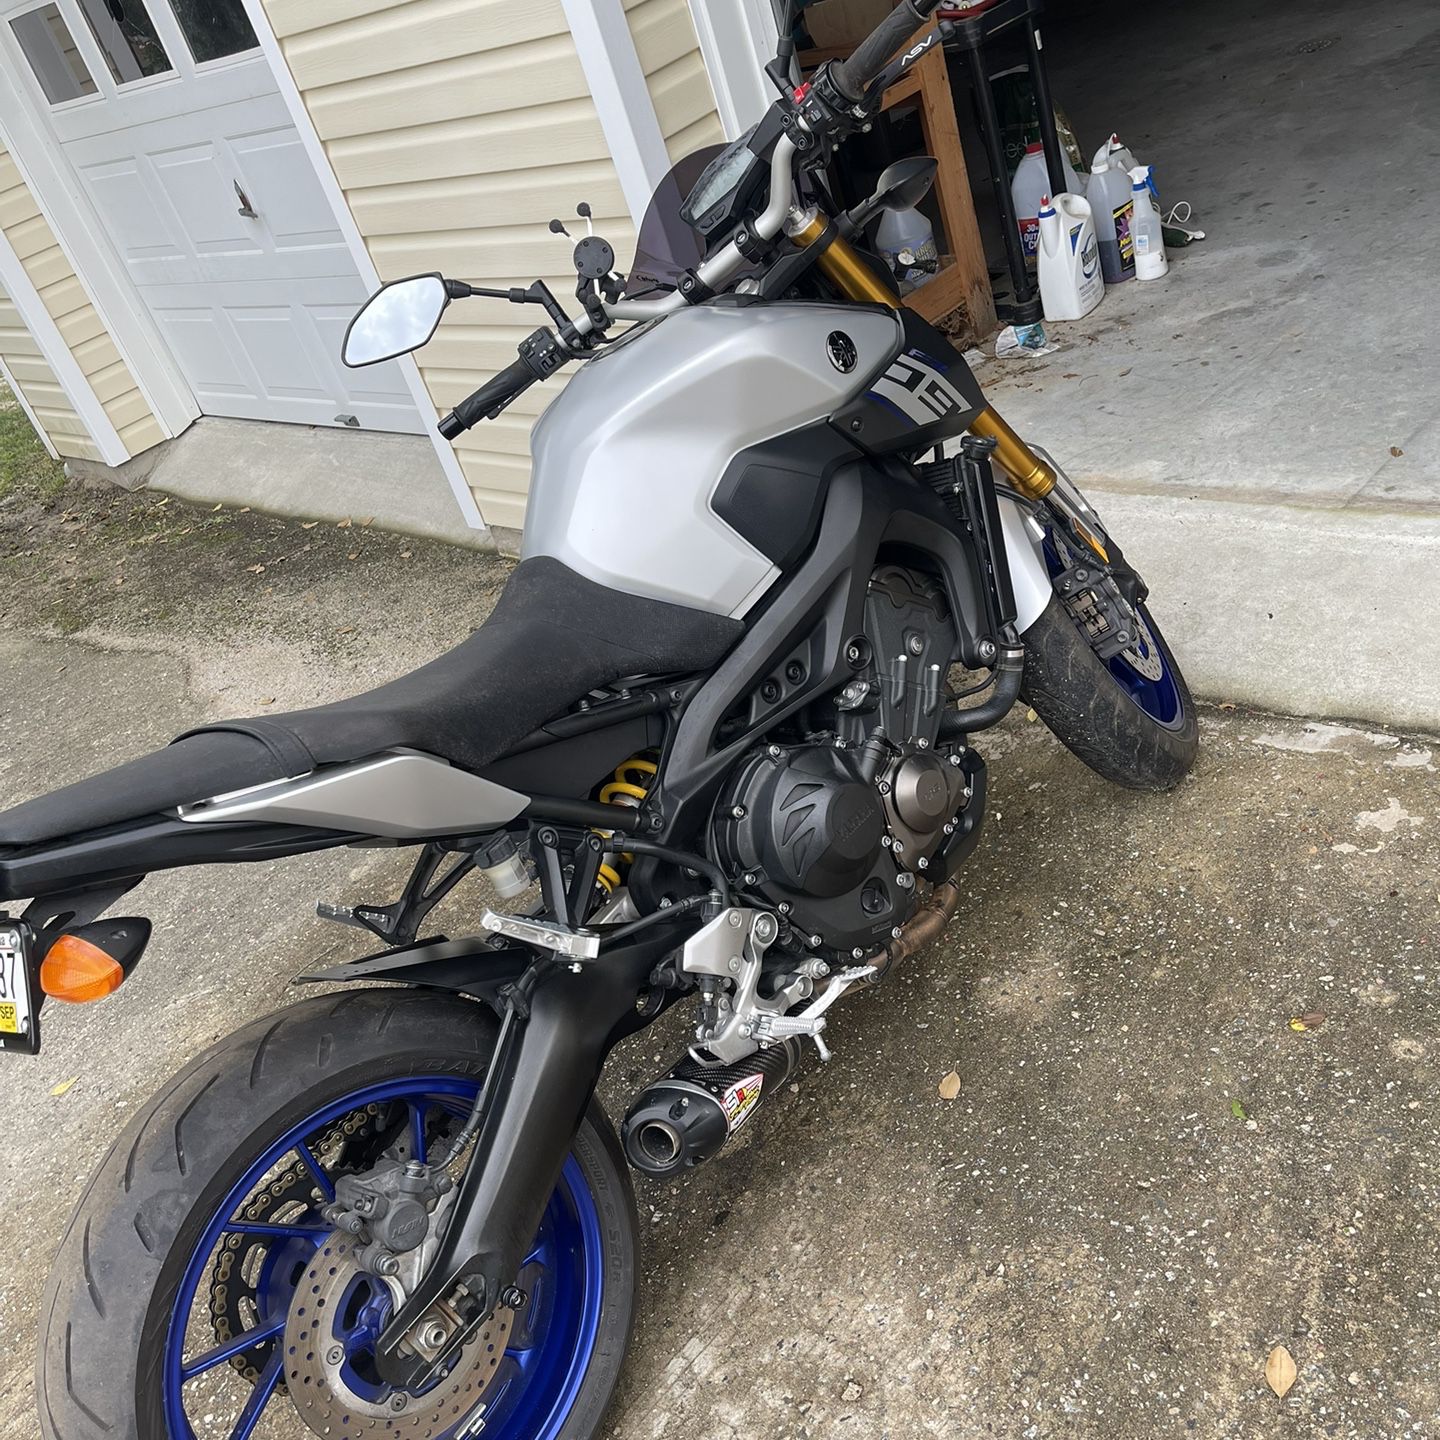 Yamaha Fz09 Almost Brand New For Sale !